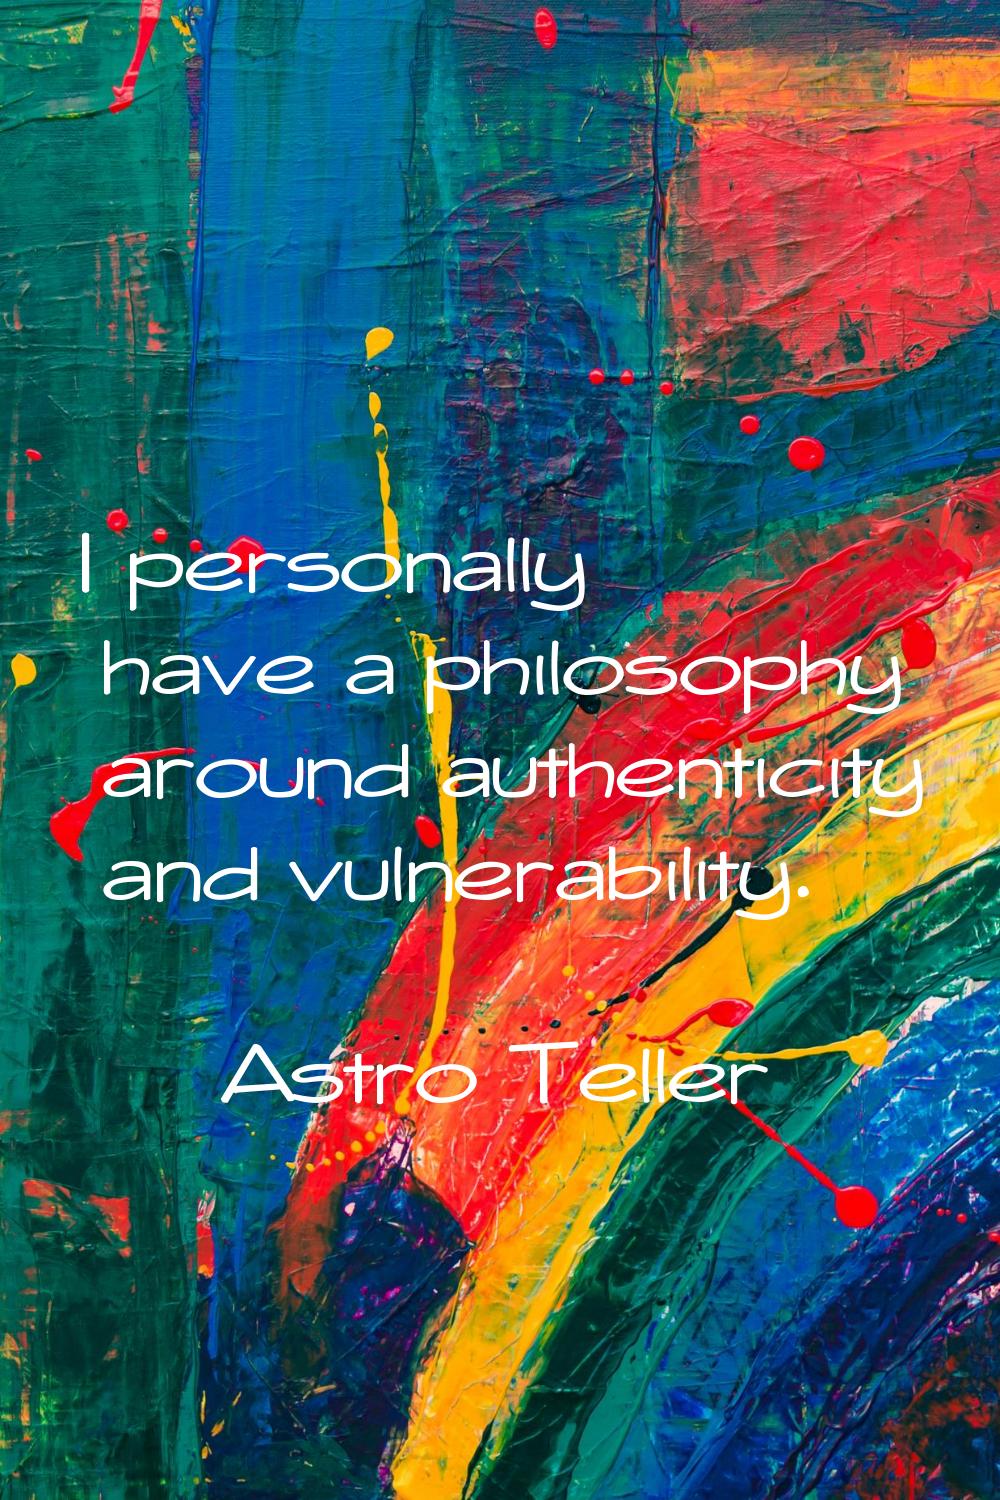 I personally have a philosophy around authenticity and vulnerability.